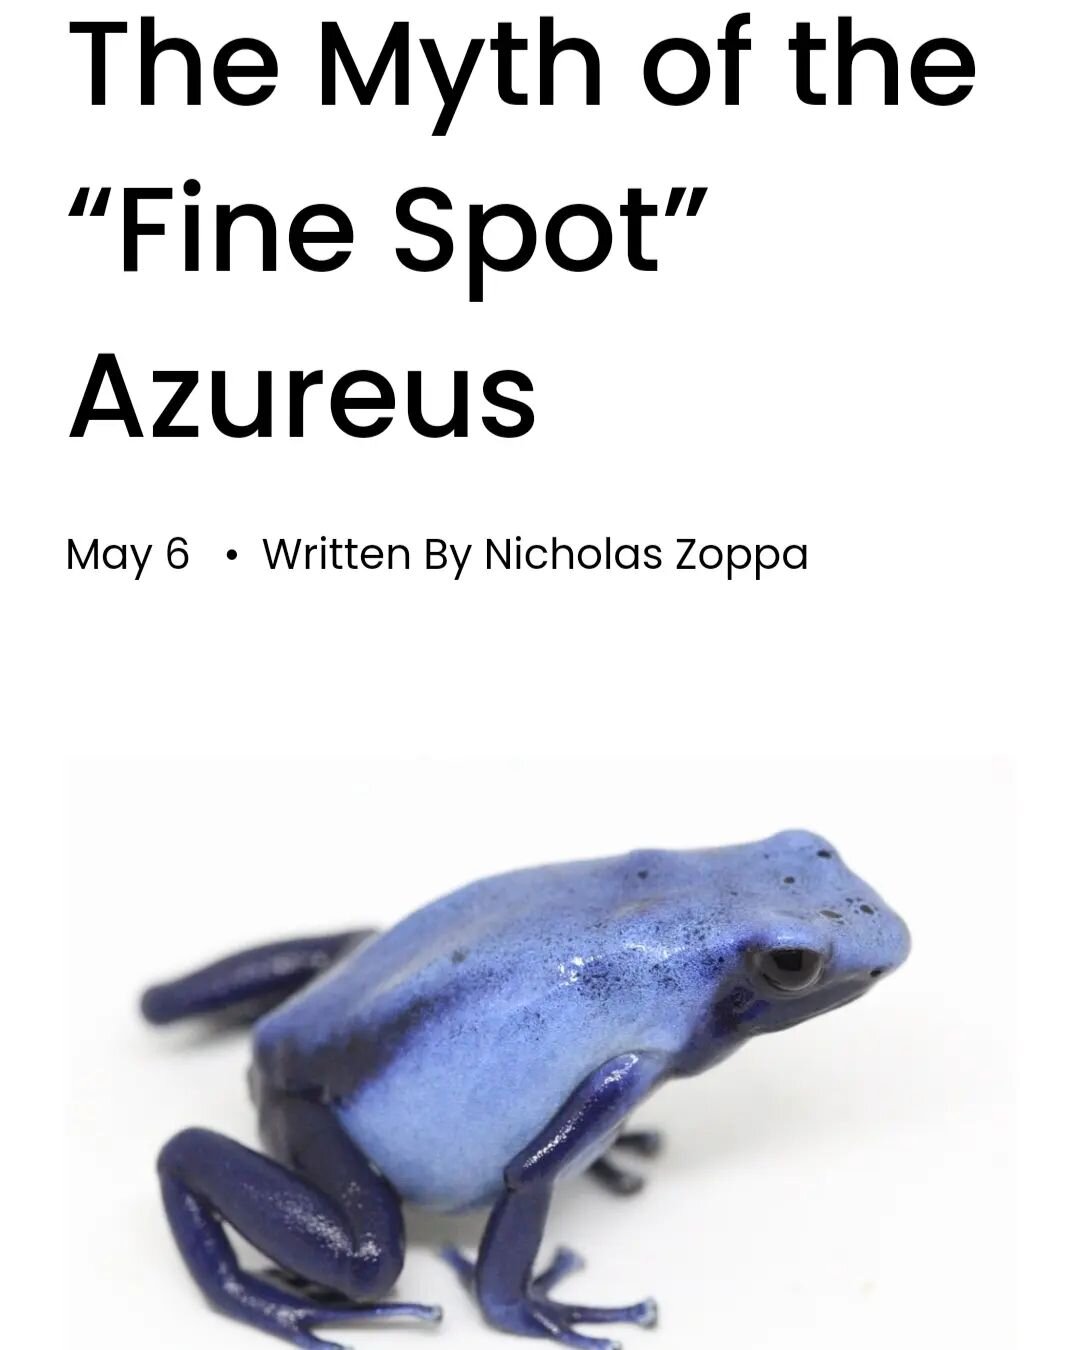 New article tackling one of the biggest arguments in the dart frog hobby. 

Finespot Azureus... Natural or linebred? 

Check it out for yourself! 

https://www.tinctank.com/articles/the-myth-of-the-finespot-azureus 

⬆️ LINK IN BIO ⬆️ 

#dendrobates 